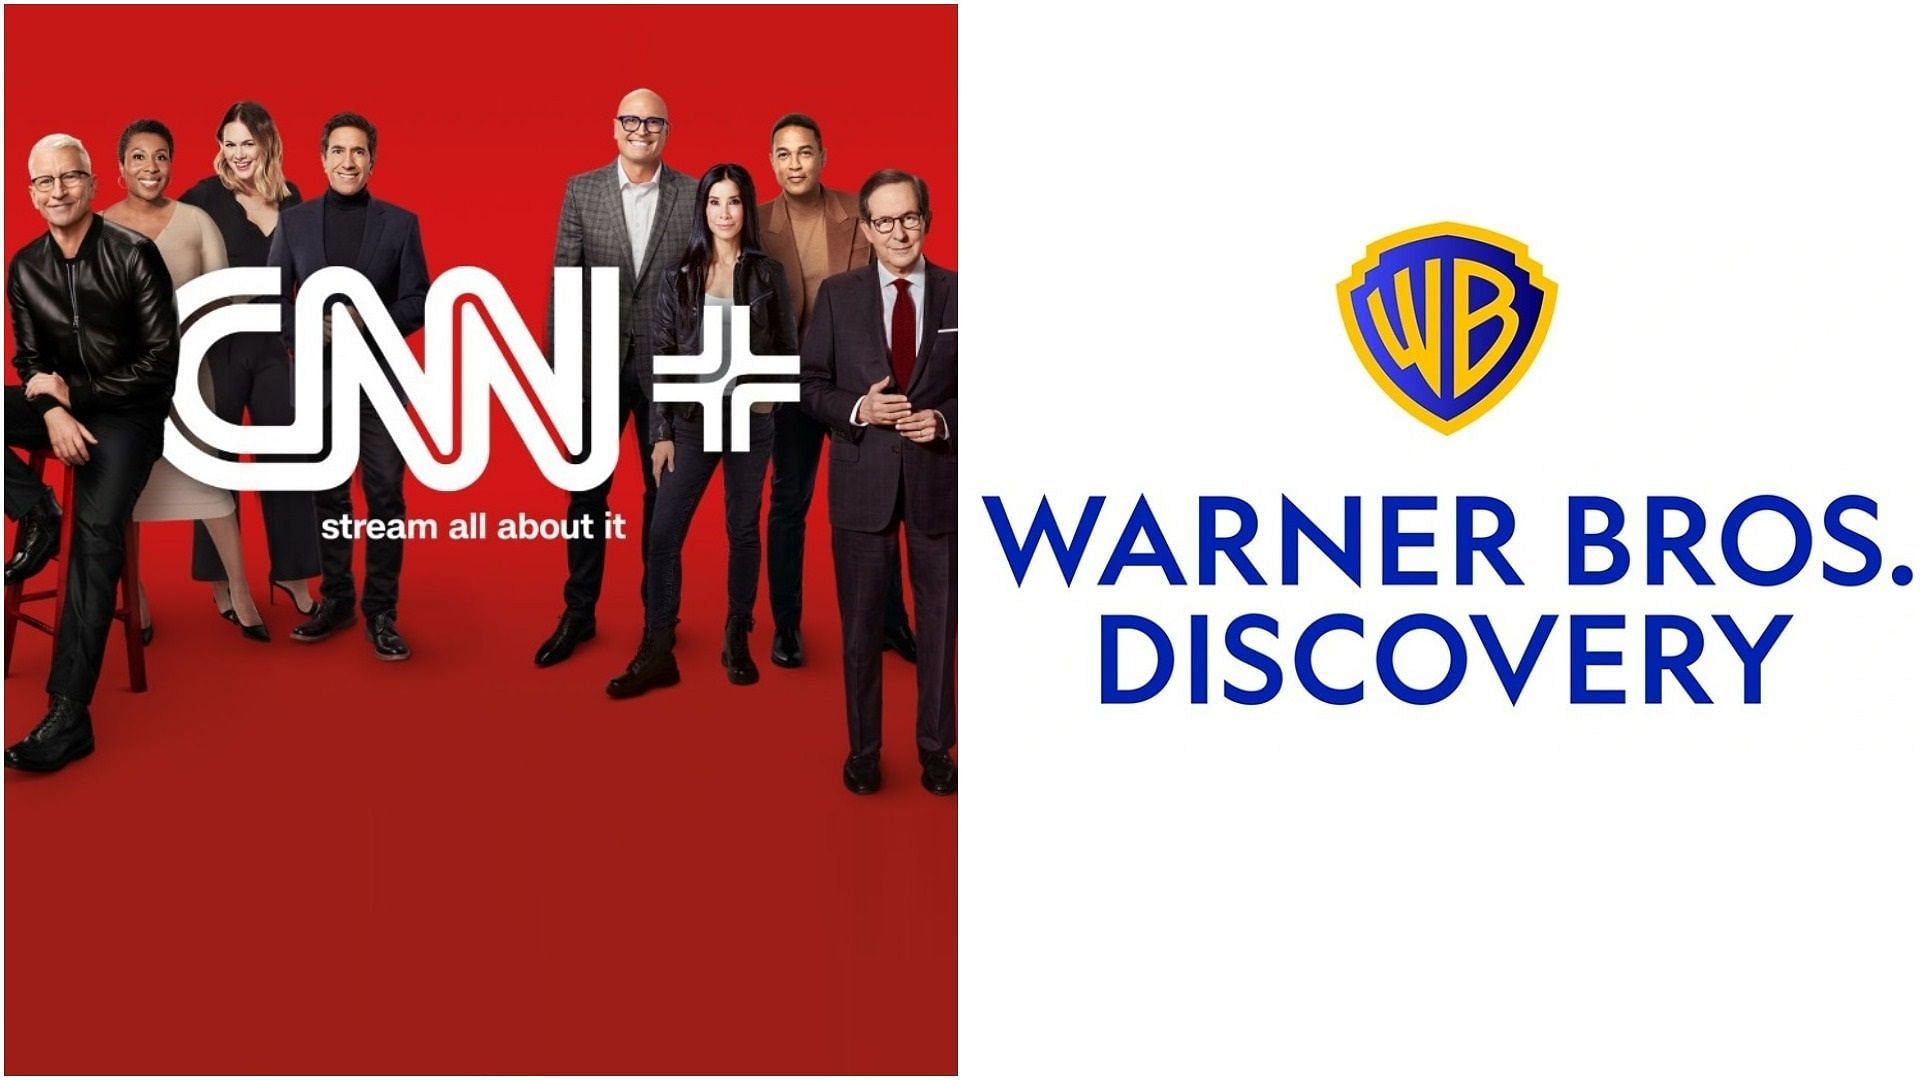 Warner Bros. Discovery will shut down CNN&#039;s streaming service (Image via CNN and Warner Bros. Discovery)